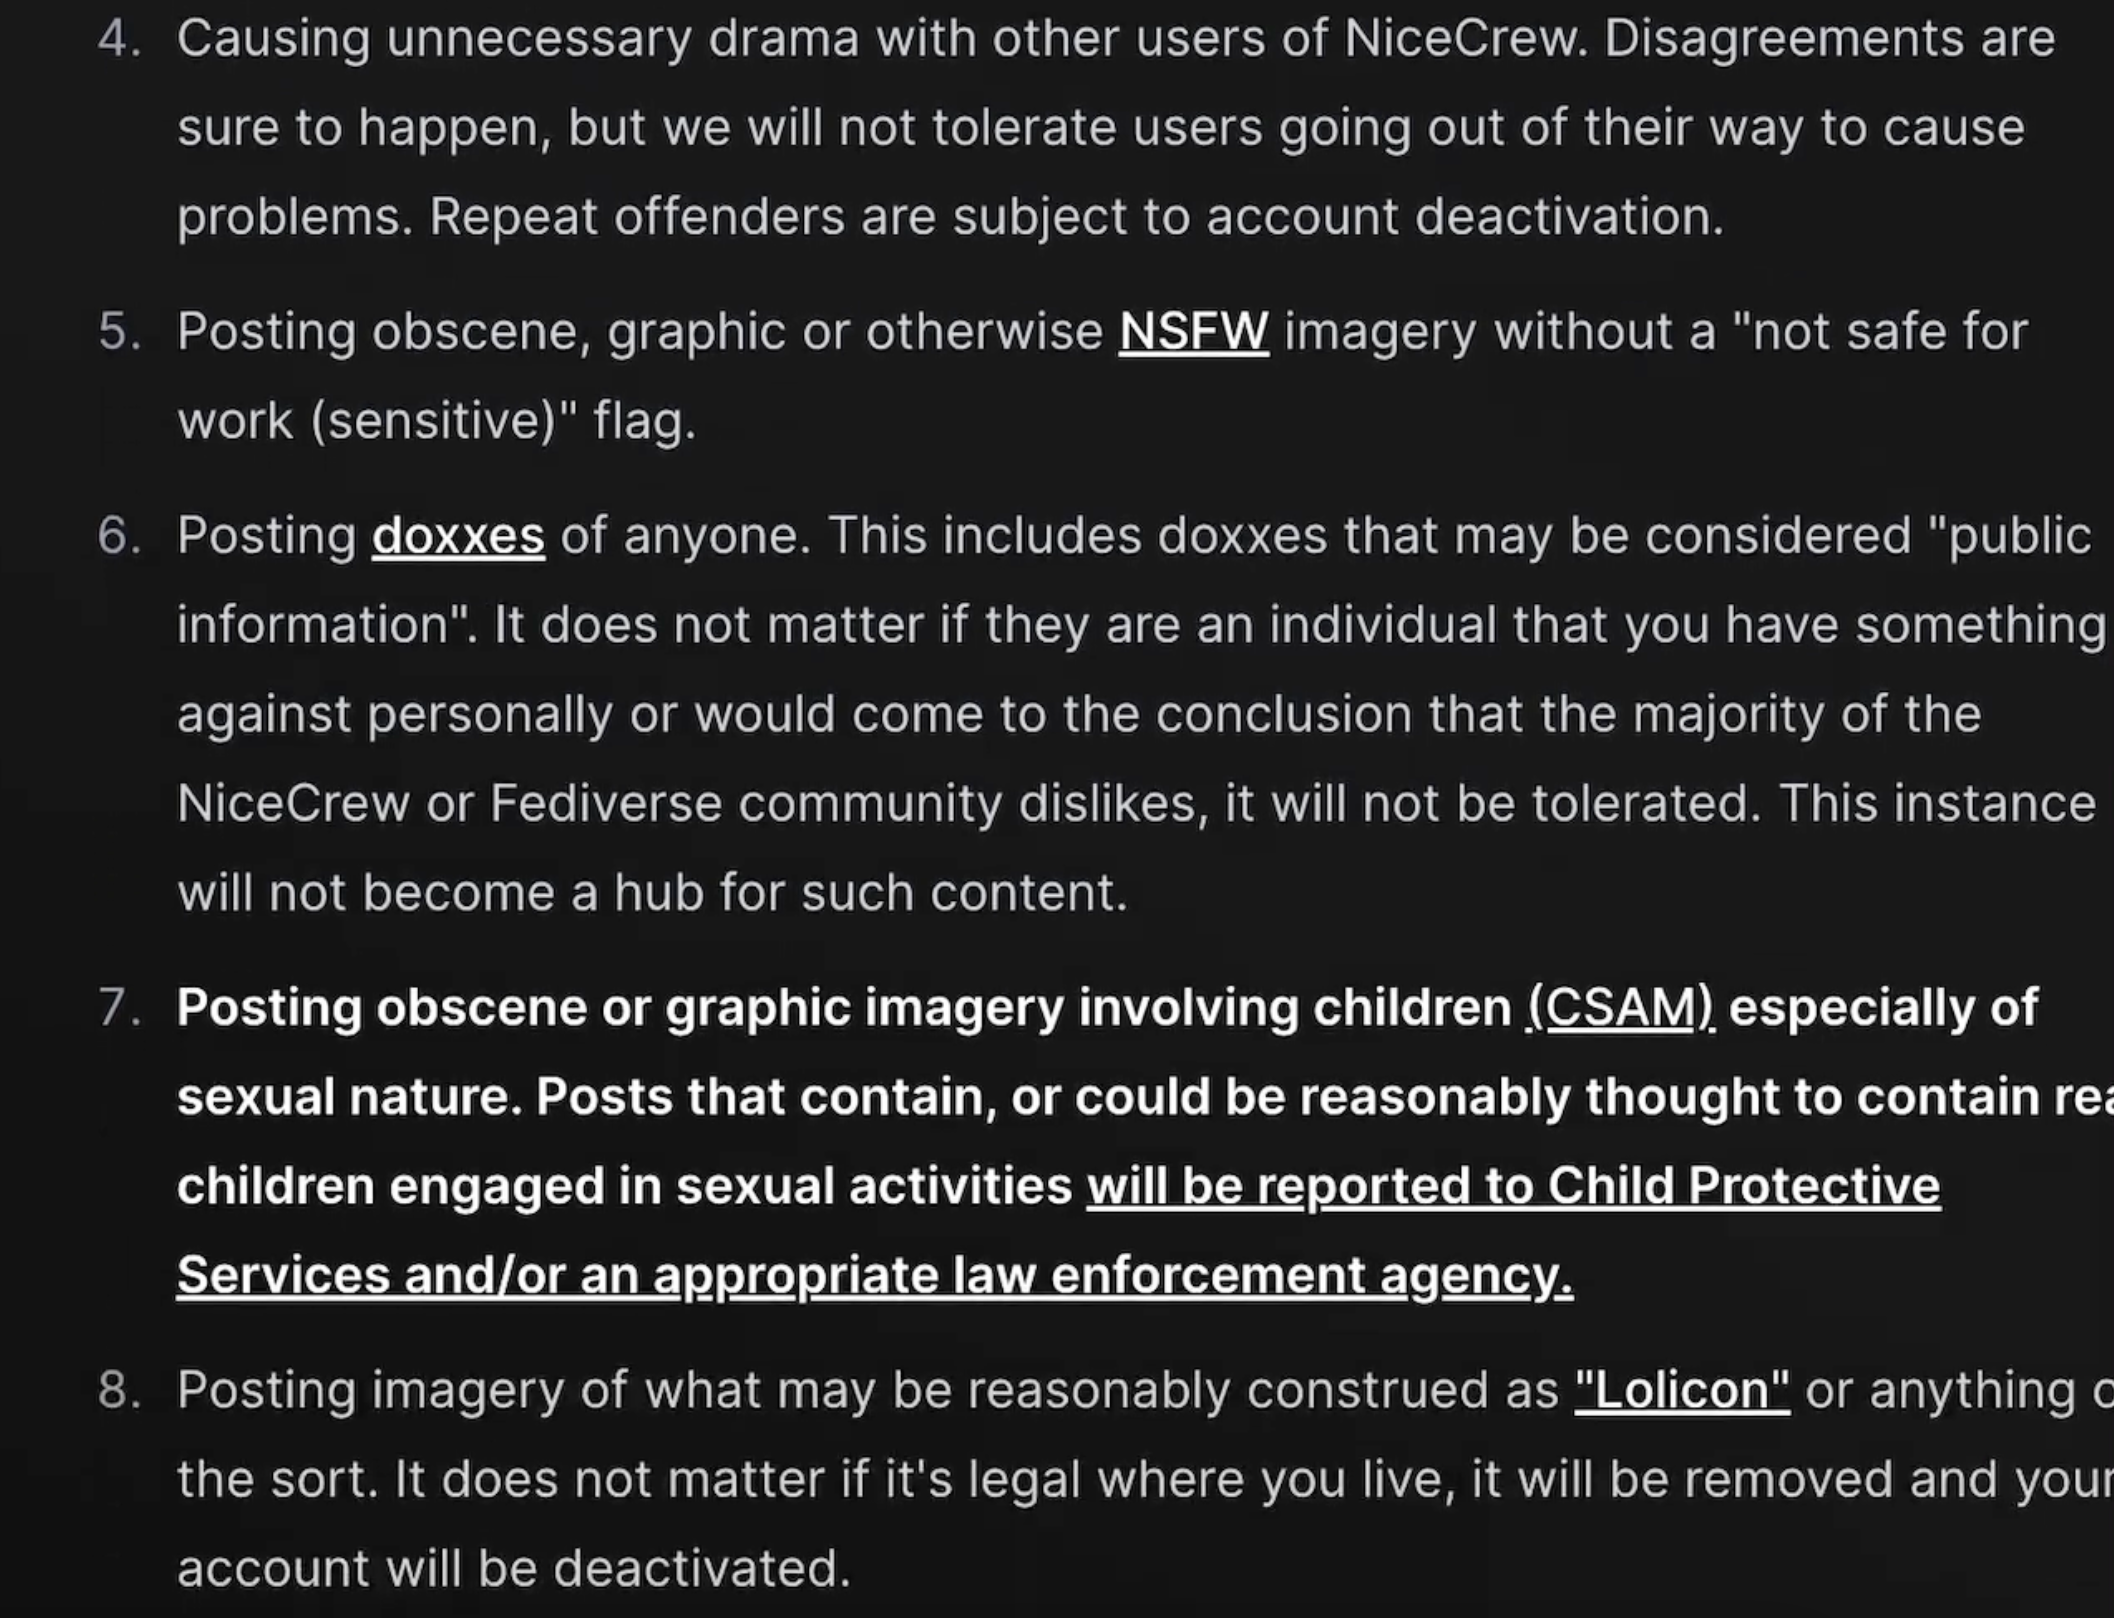 Site rules for NiceCrew's Poast instance cont'd. Includes warnings against posting "obscene, graphic, or otherwise NSFW imagery," doxxing, "obscene or graphic imagery involving children," and "posting imagery of what may reasonably be construed as Lolicon."